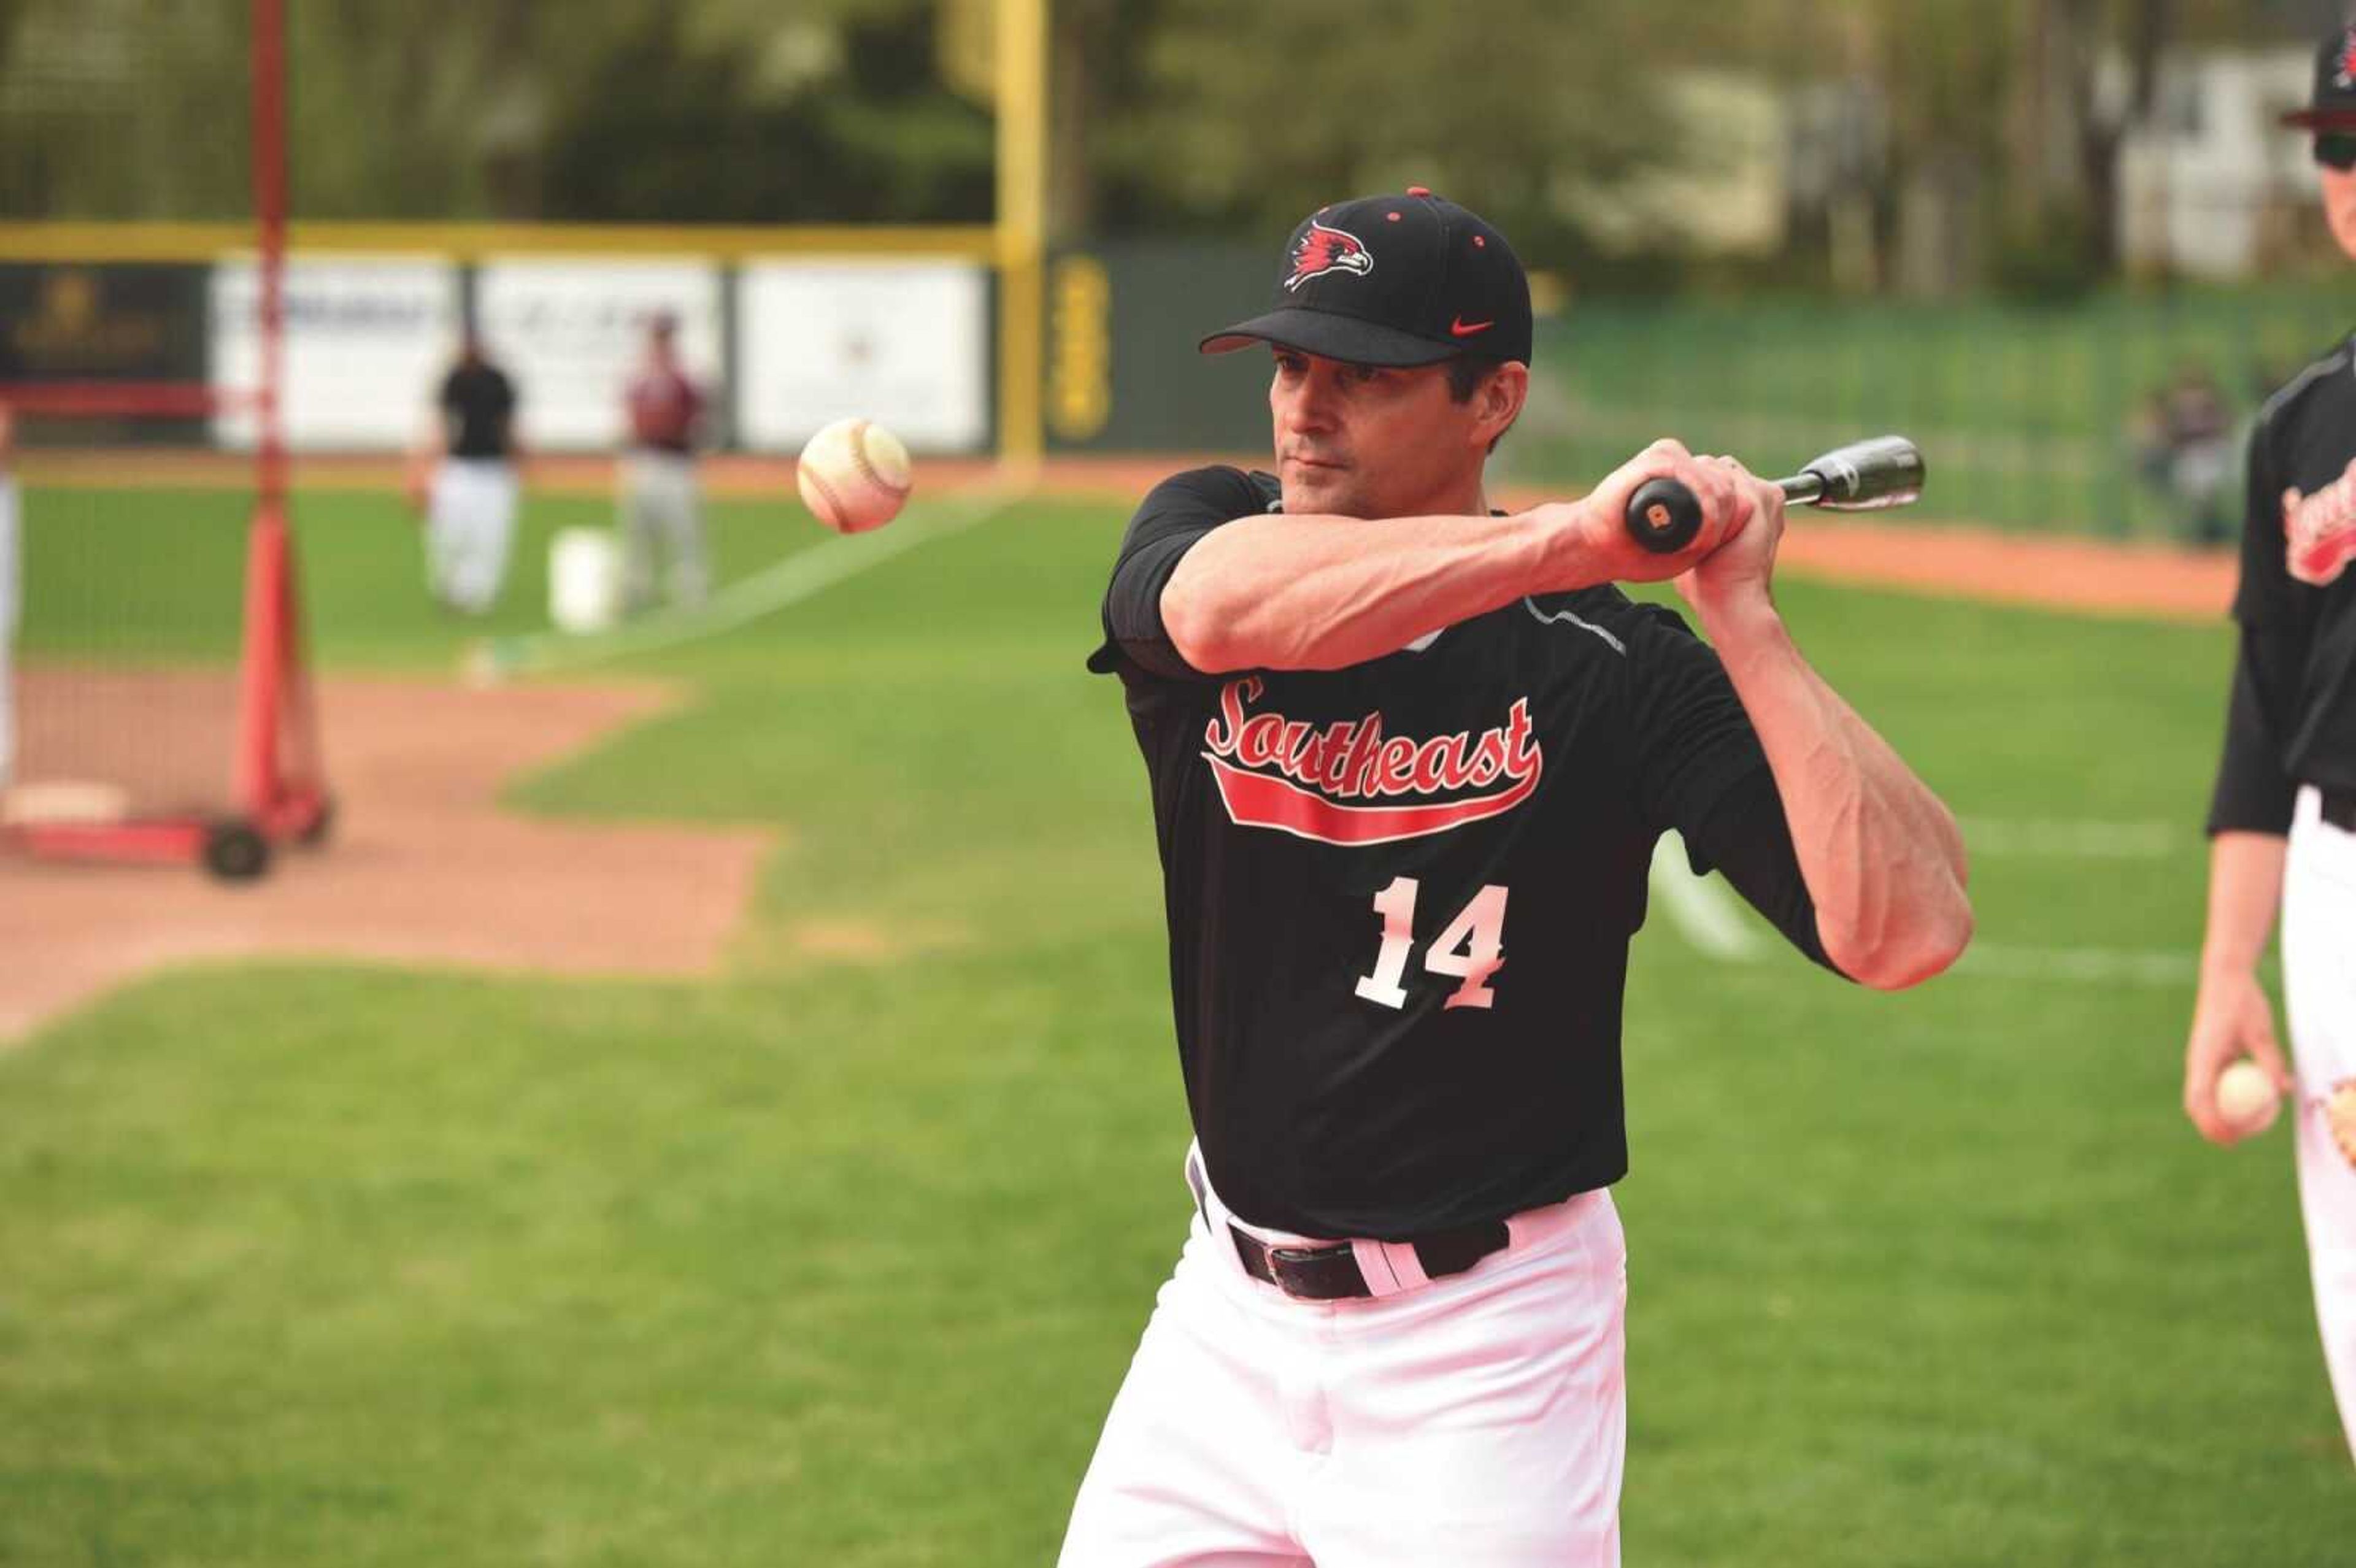 Southeast Missouri State baseball coach Steve Bieser is 99-76 overall and 58-32 in Ohio Valley Conference play after three years of being at the helm.